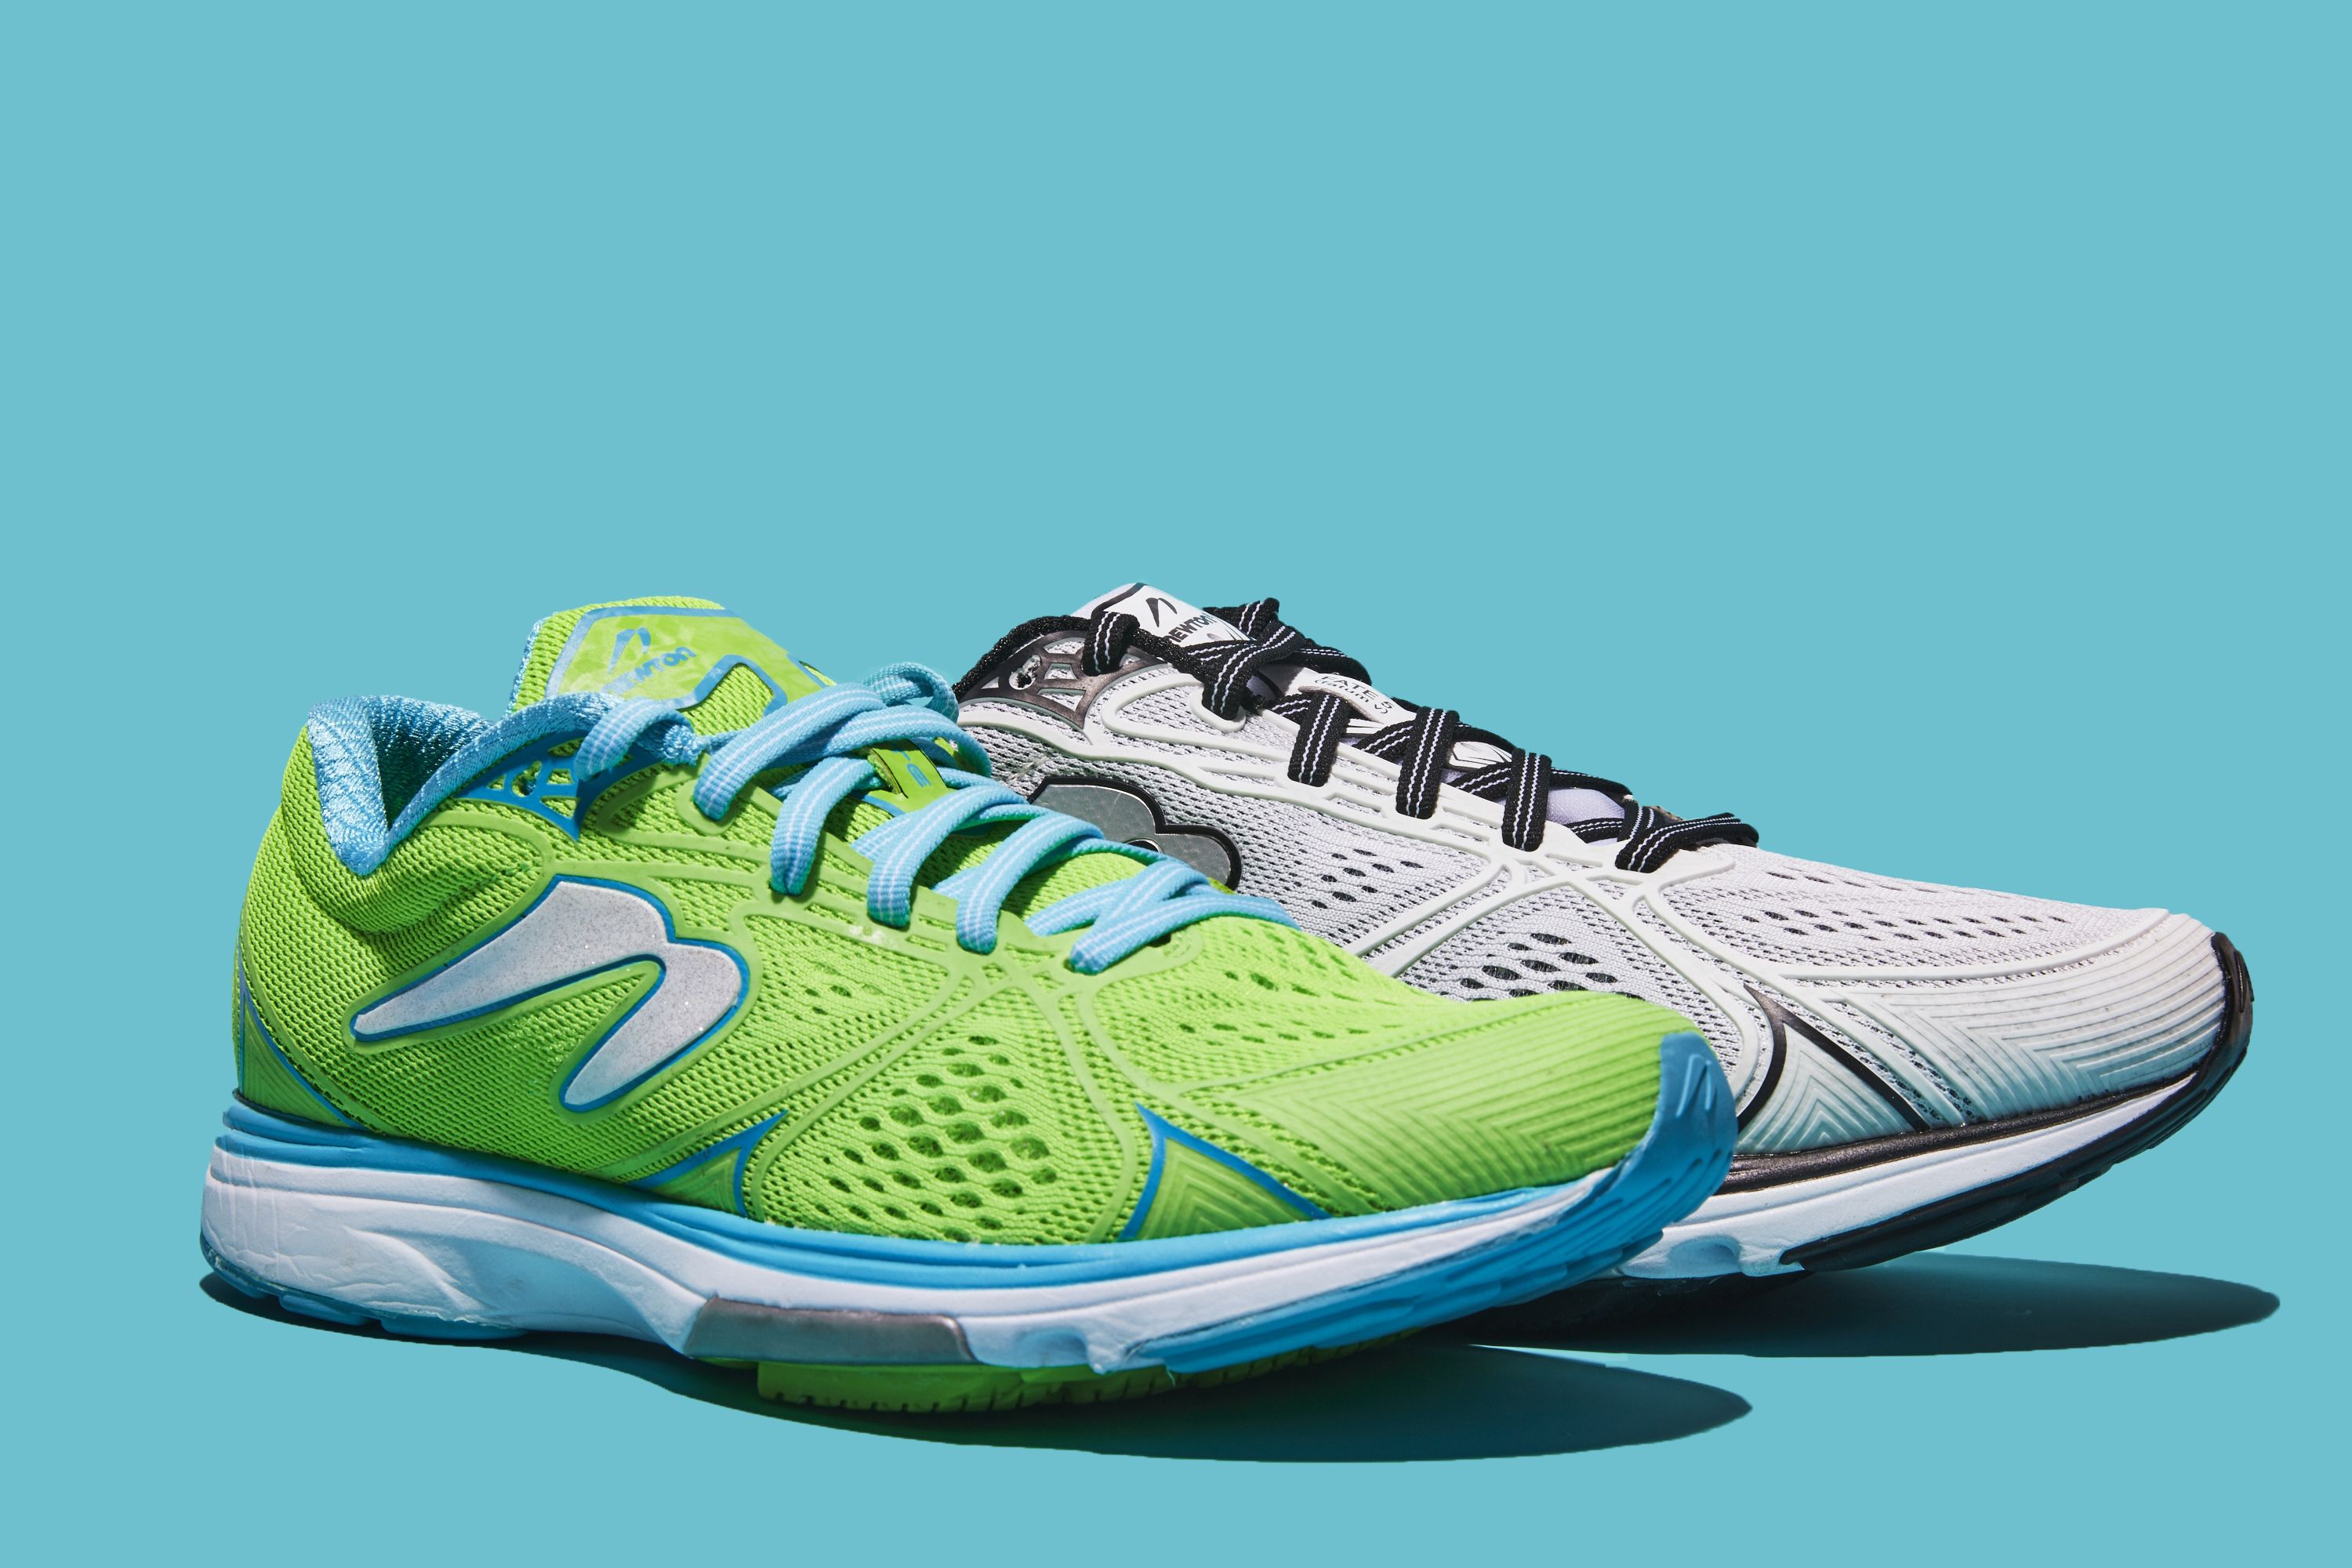 newton trail running shoes